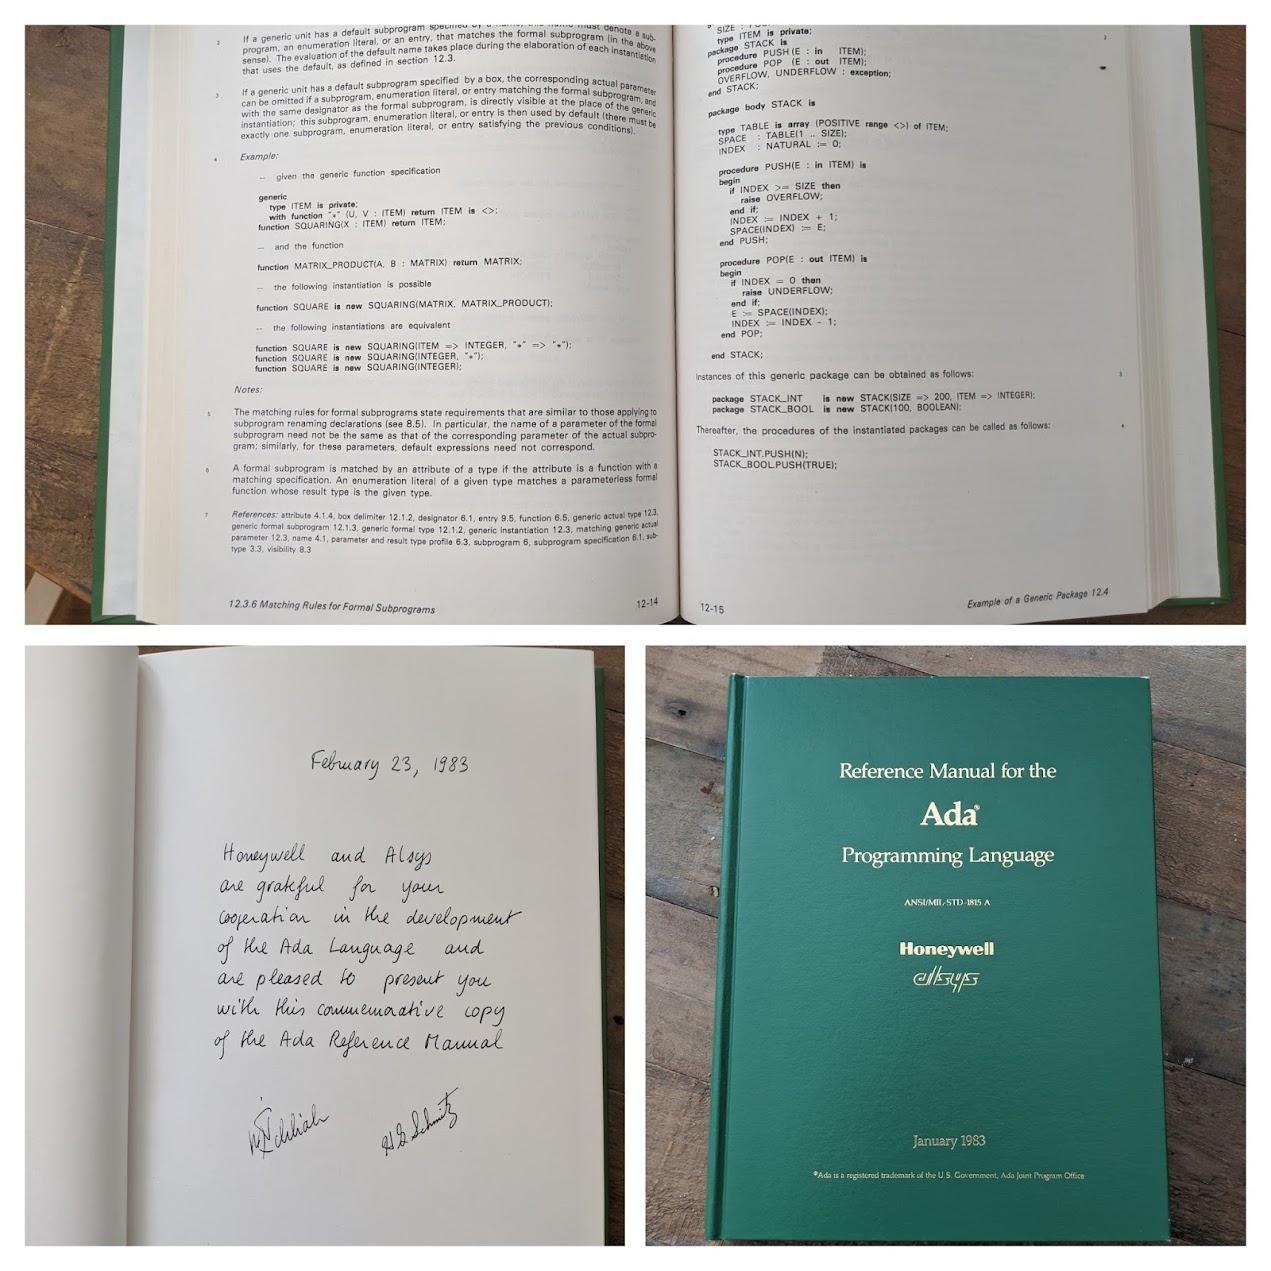 Reference Manual for the Ada Programming Language (1983)